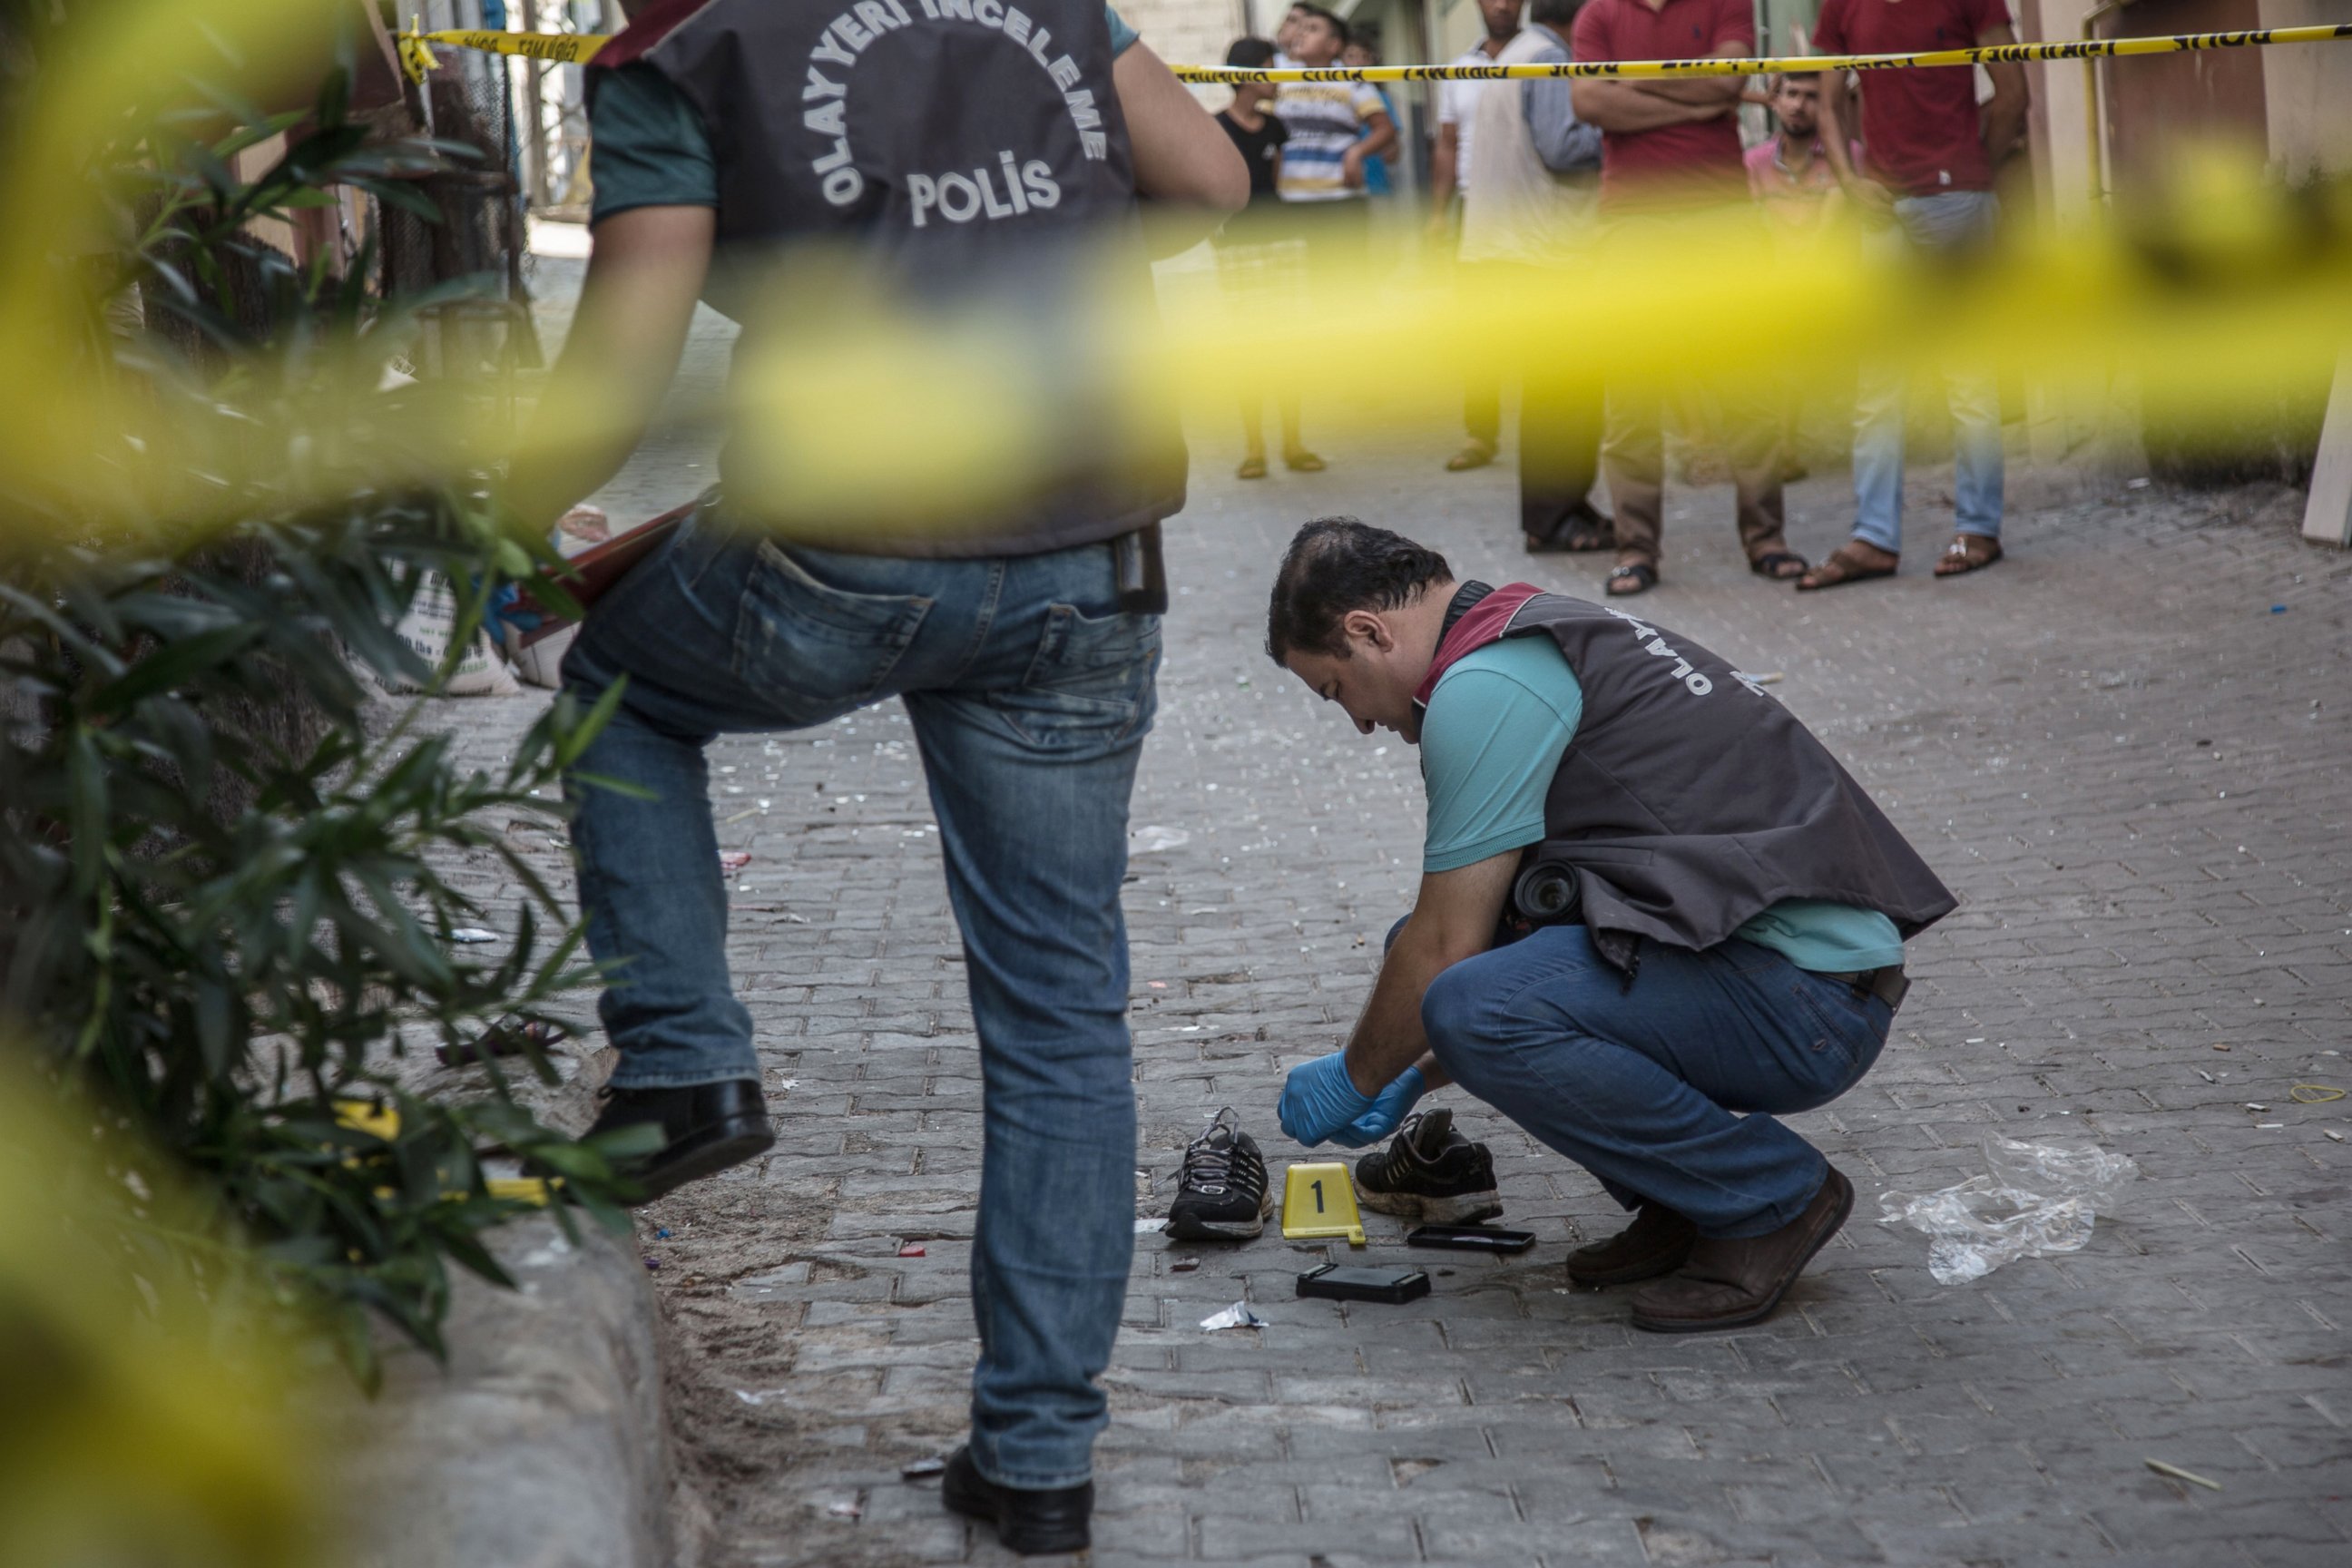 PHOTO: Turkish police work near the explosion scene following a late night attack on a wedding party that left at least 30 dead in Gaziantep in southeastern Turkey near the Syrian border, Aug. 21, 2016. 
